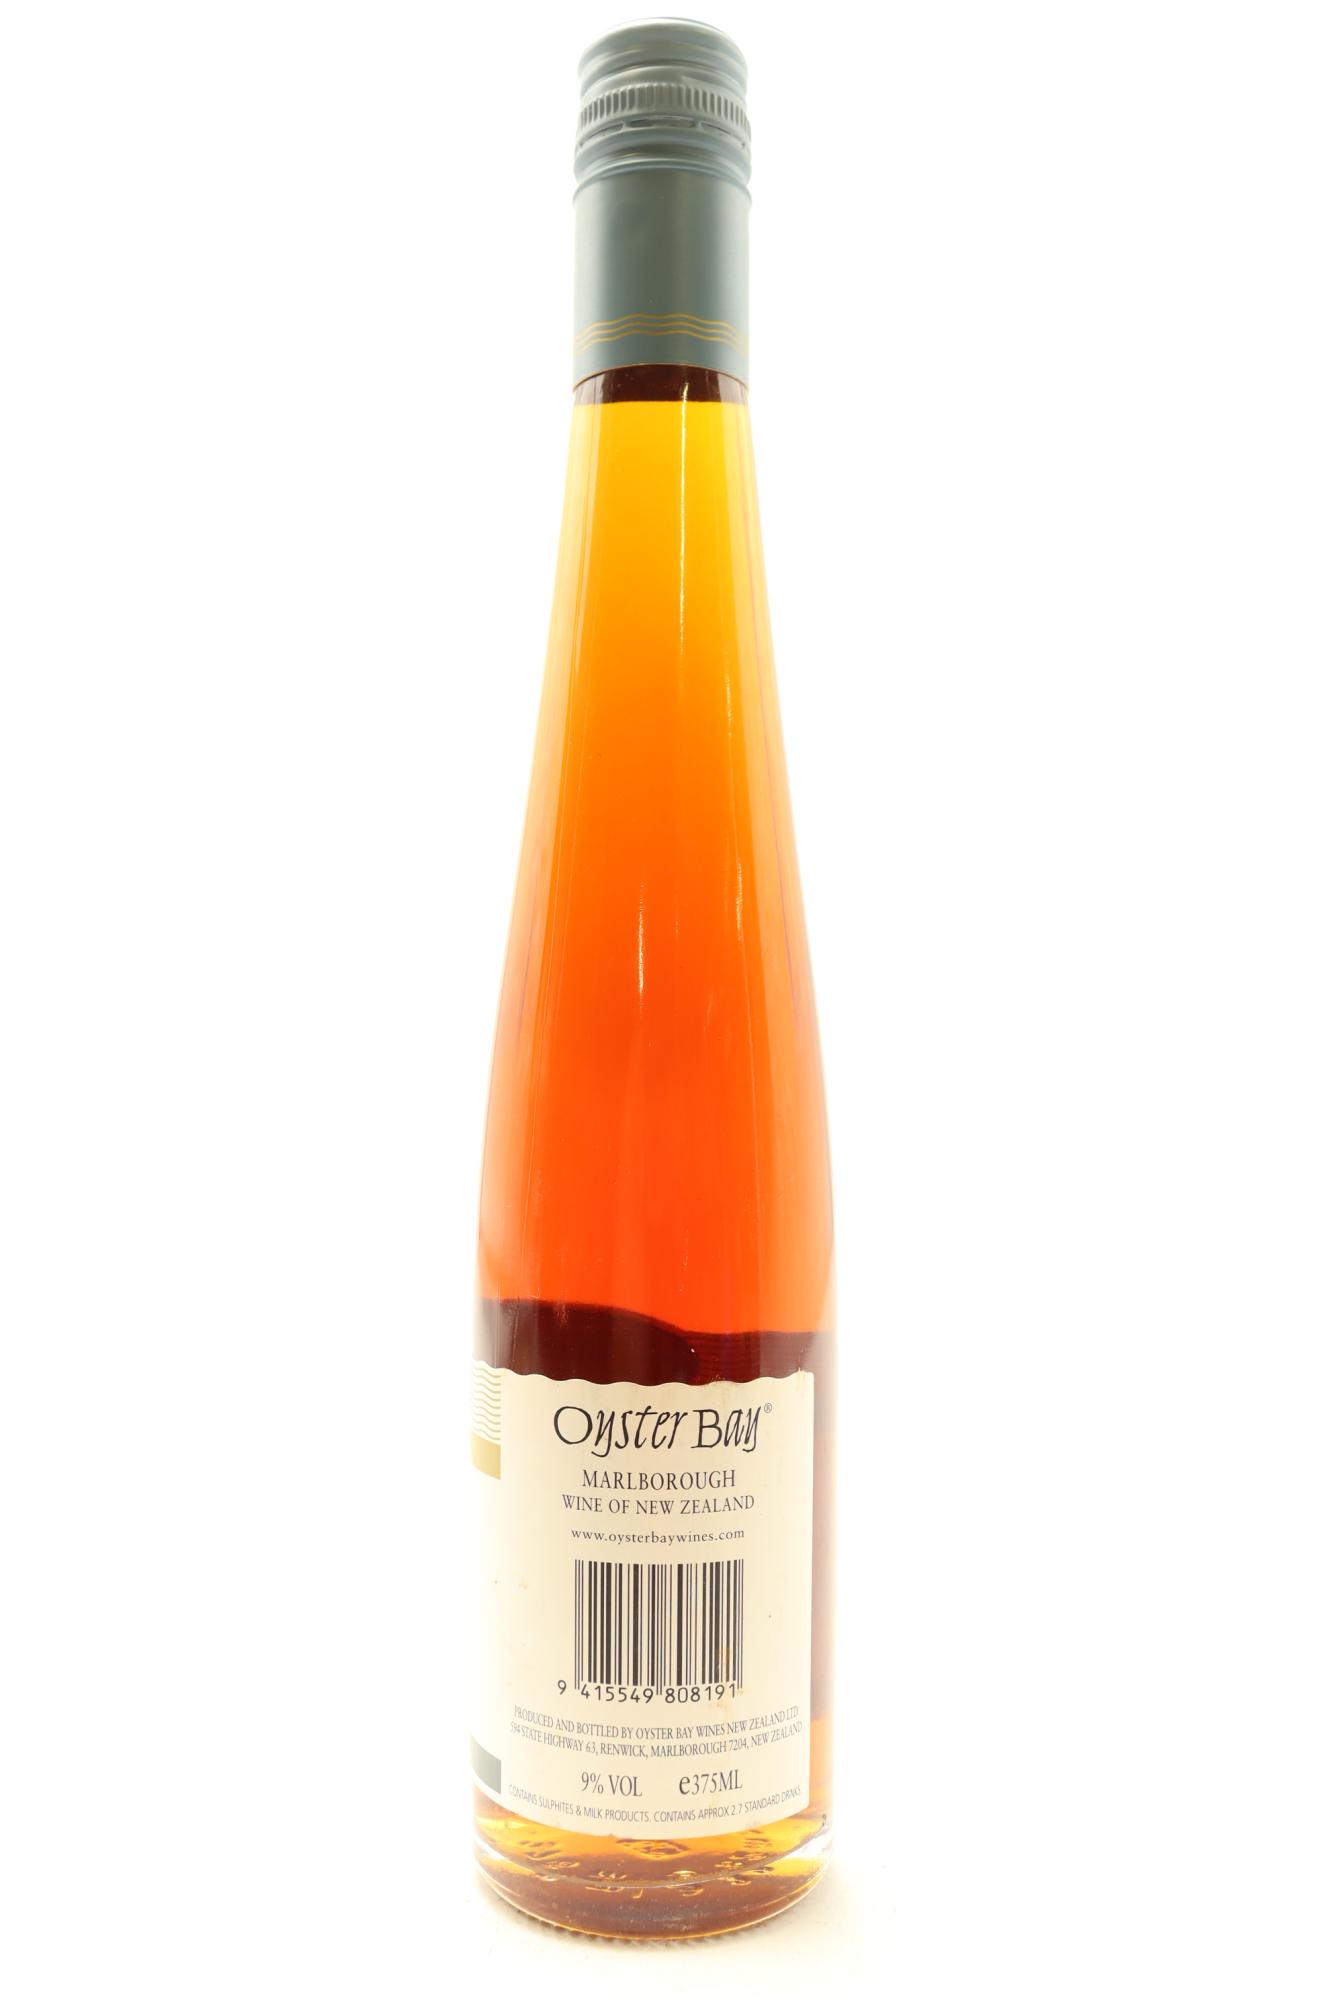 Where to buy Oyster Bay Botrytised Riesling, Marlborough, New Zealand